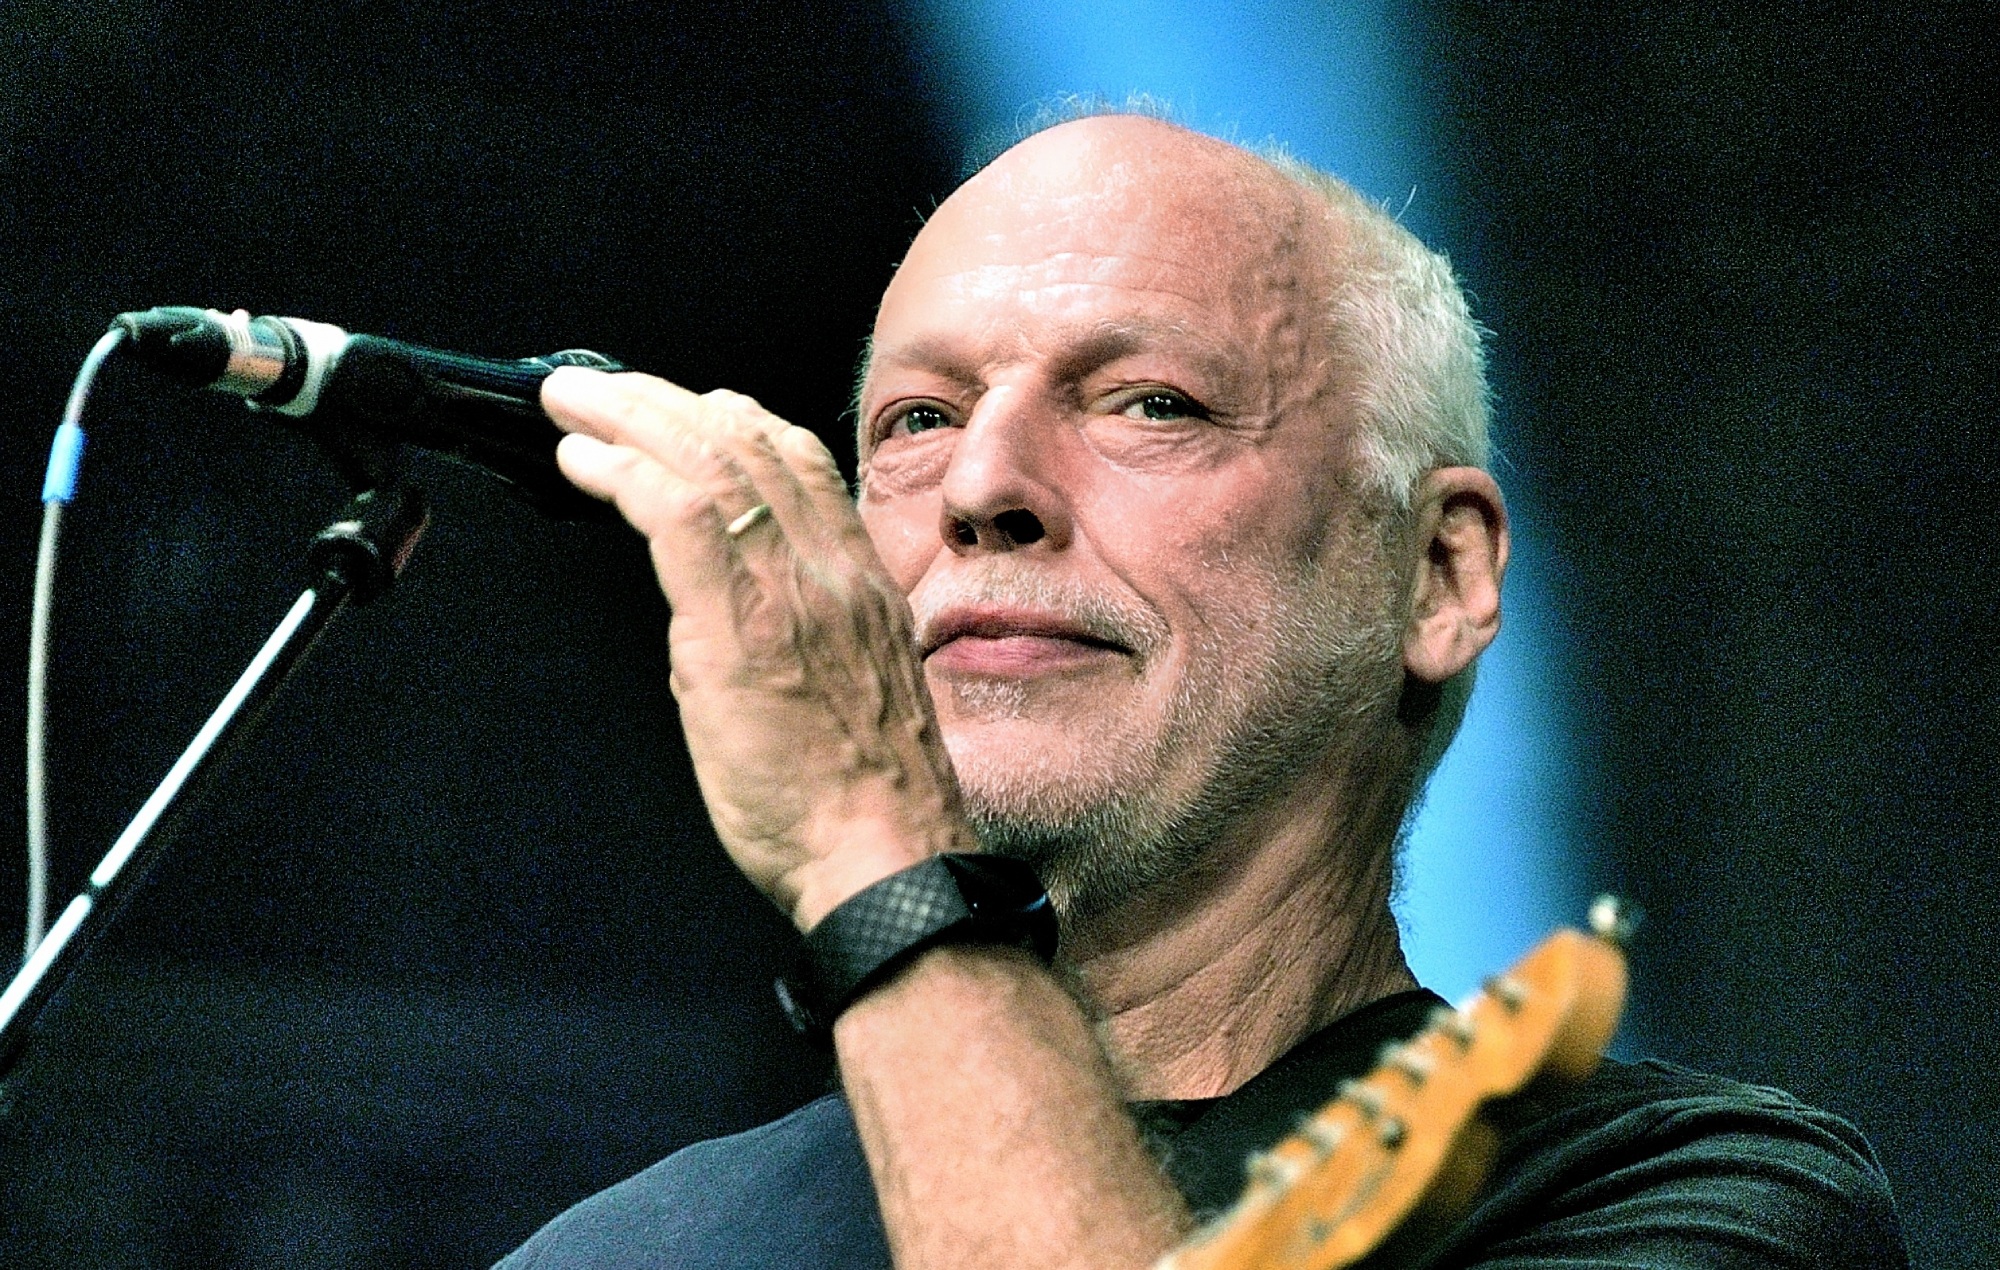 David Gilmour says he found The Beatles’ ‘Get Back’ documentary “a hard watch” and he’s “surprised Paul McCartney allowed it”